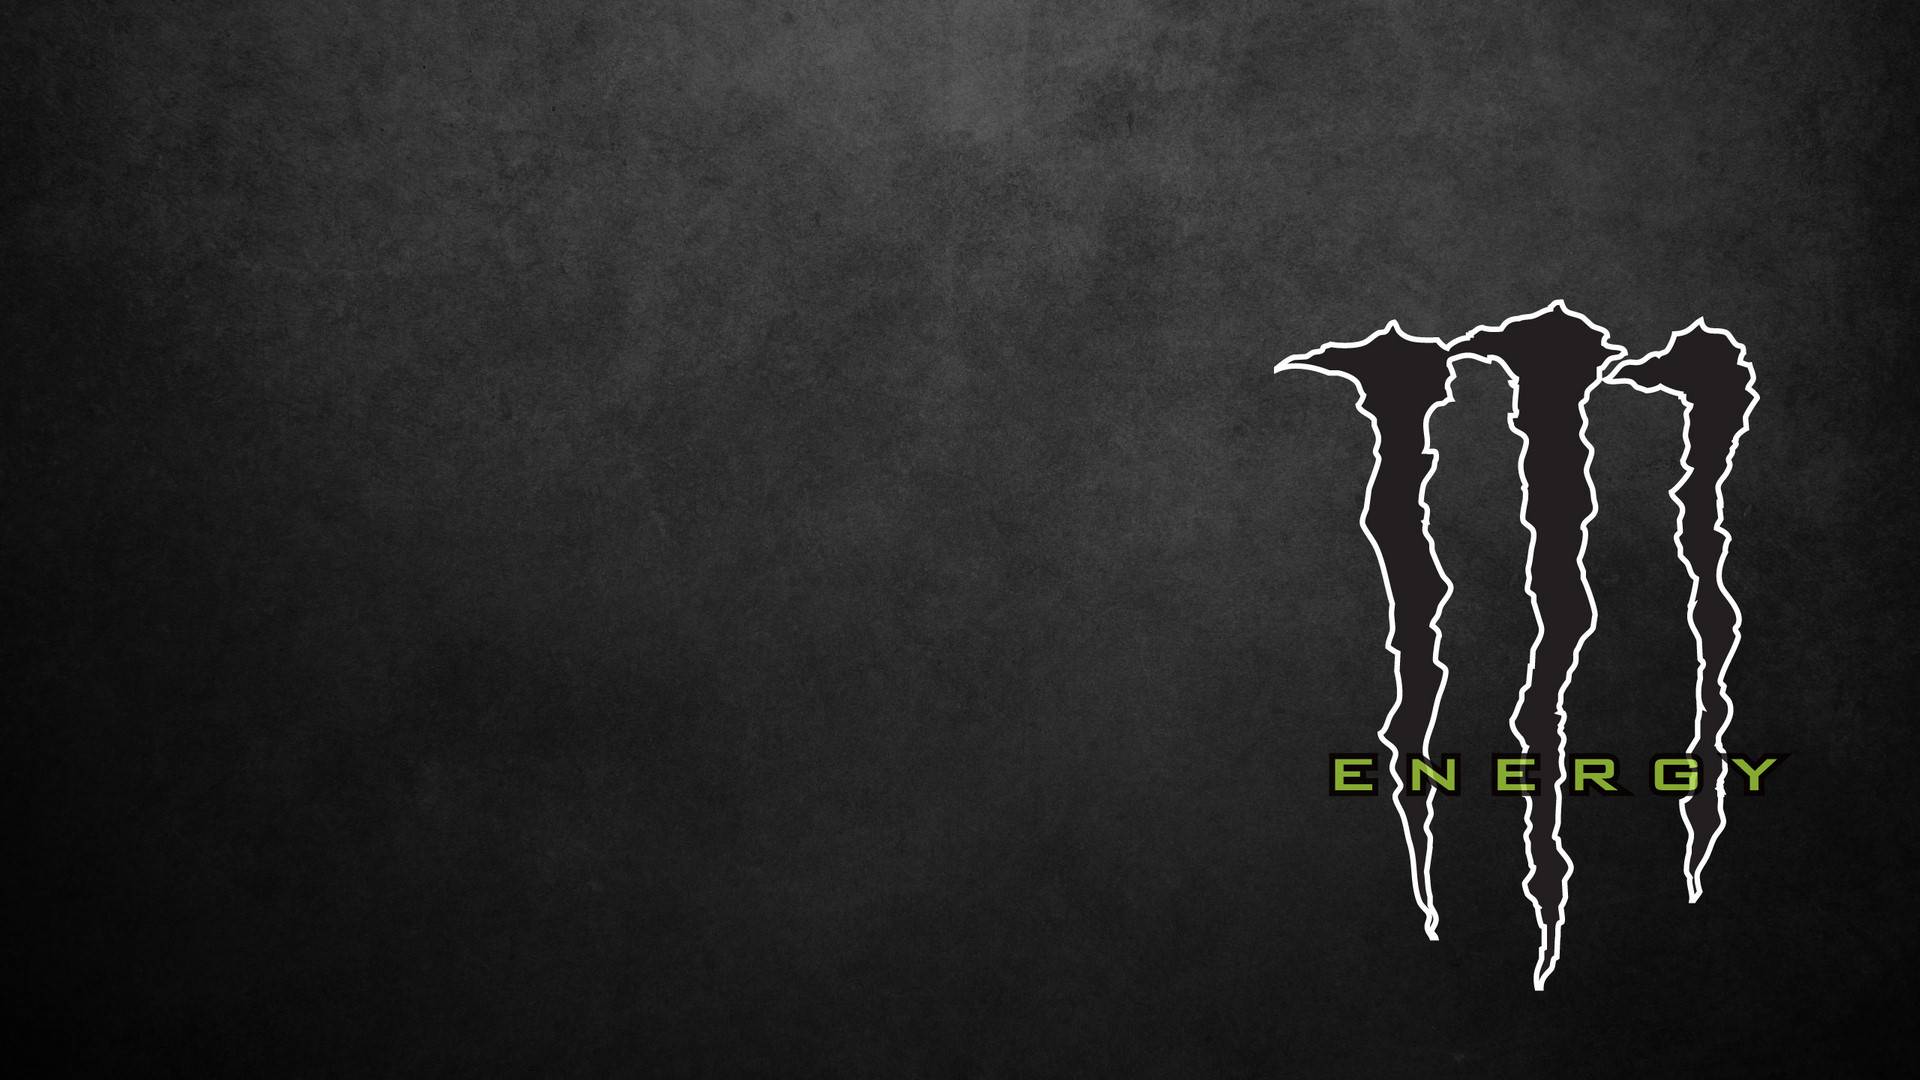 78 Monster Energy Pictures Wallpapers On Wallpapersafari